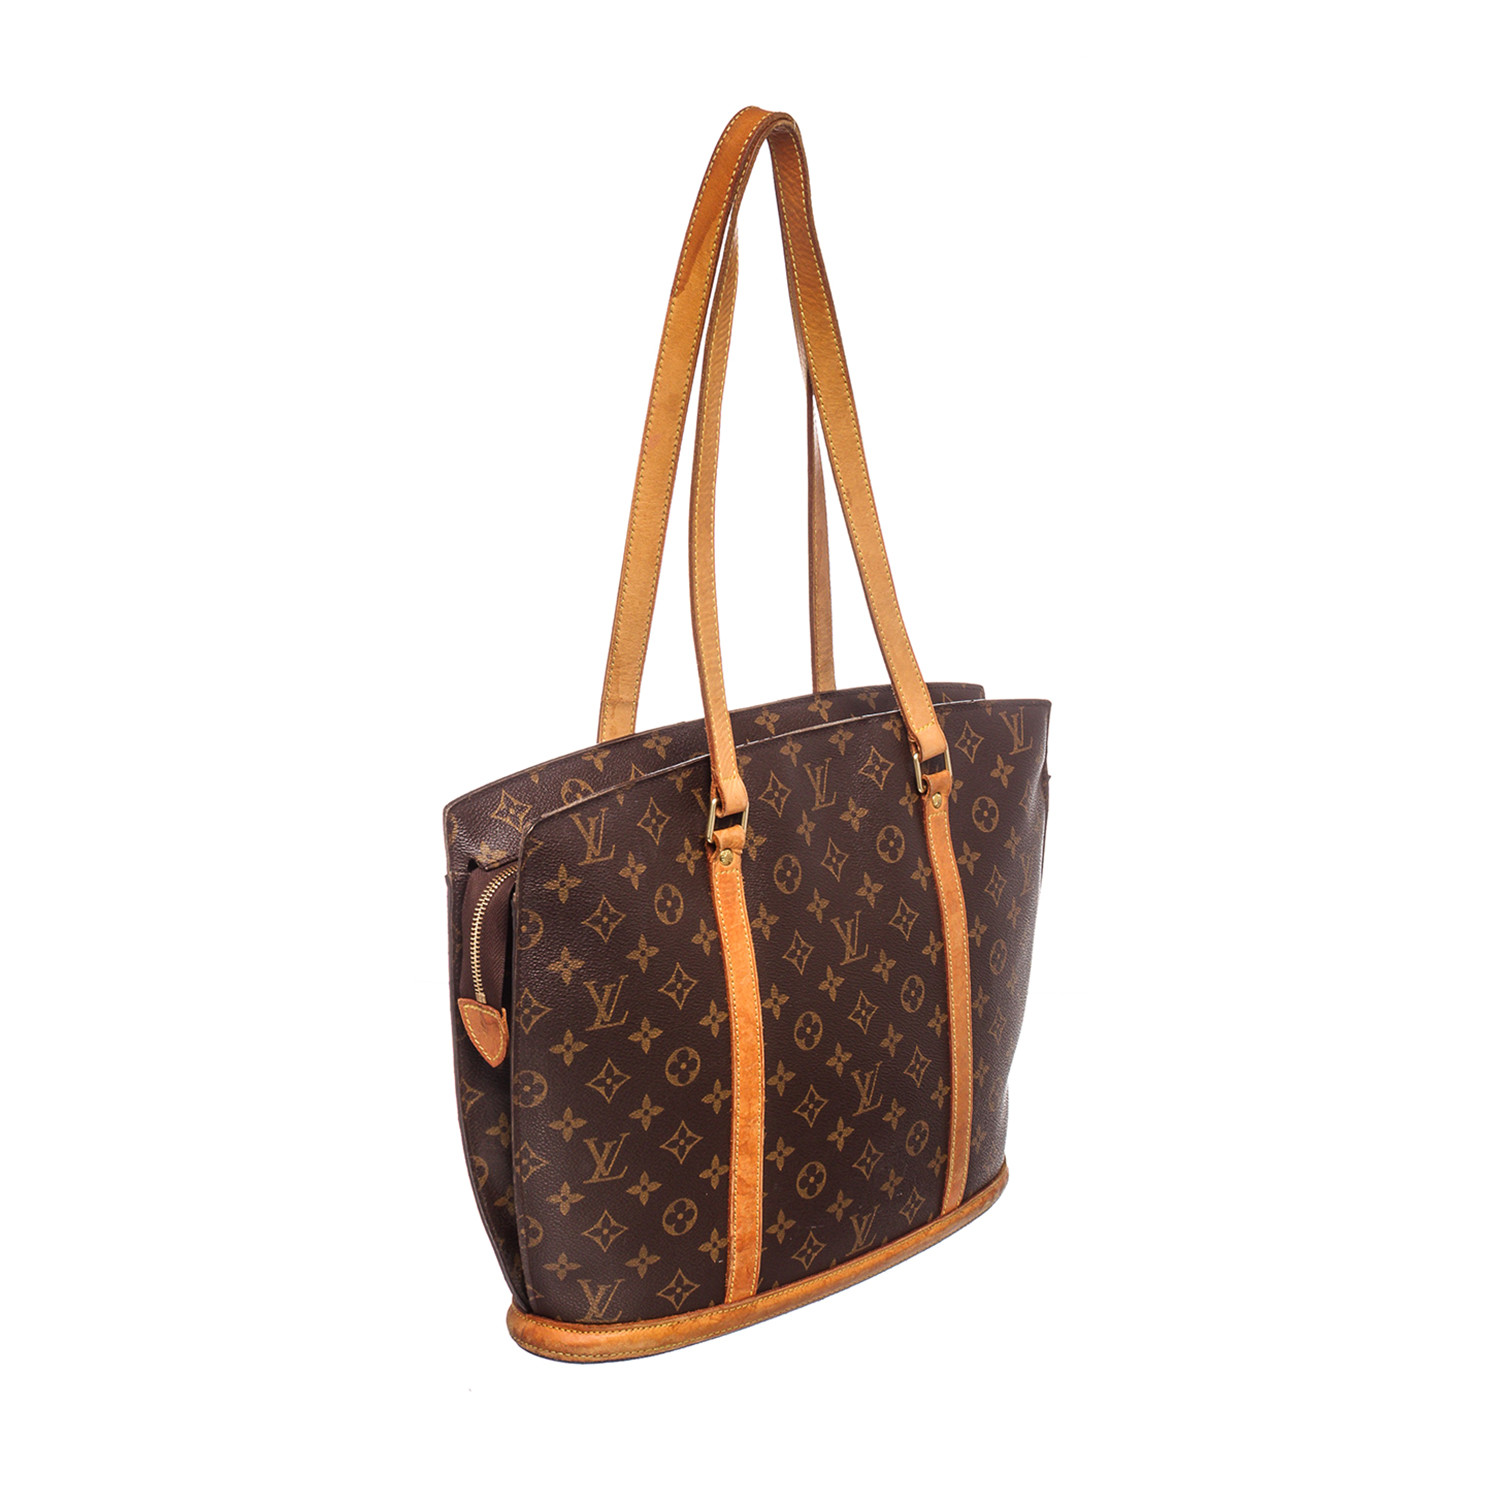 Louis Vuitton // Monogram Canvas Leather Babylone Tote Bag // MB0092 // Pre-Owned - Pre-Owned ...